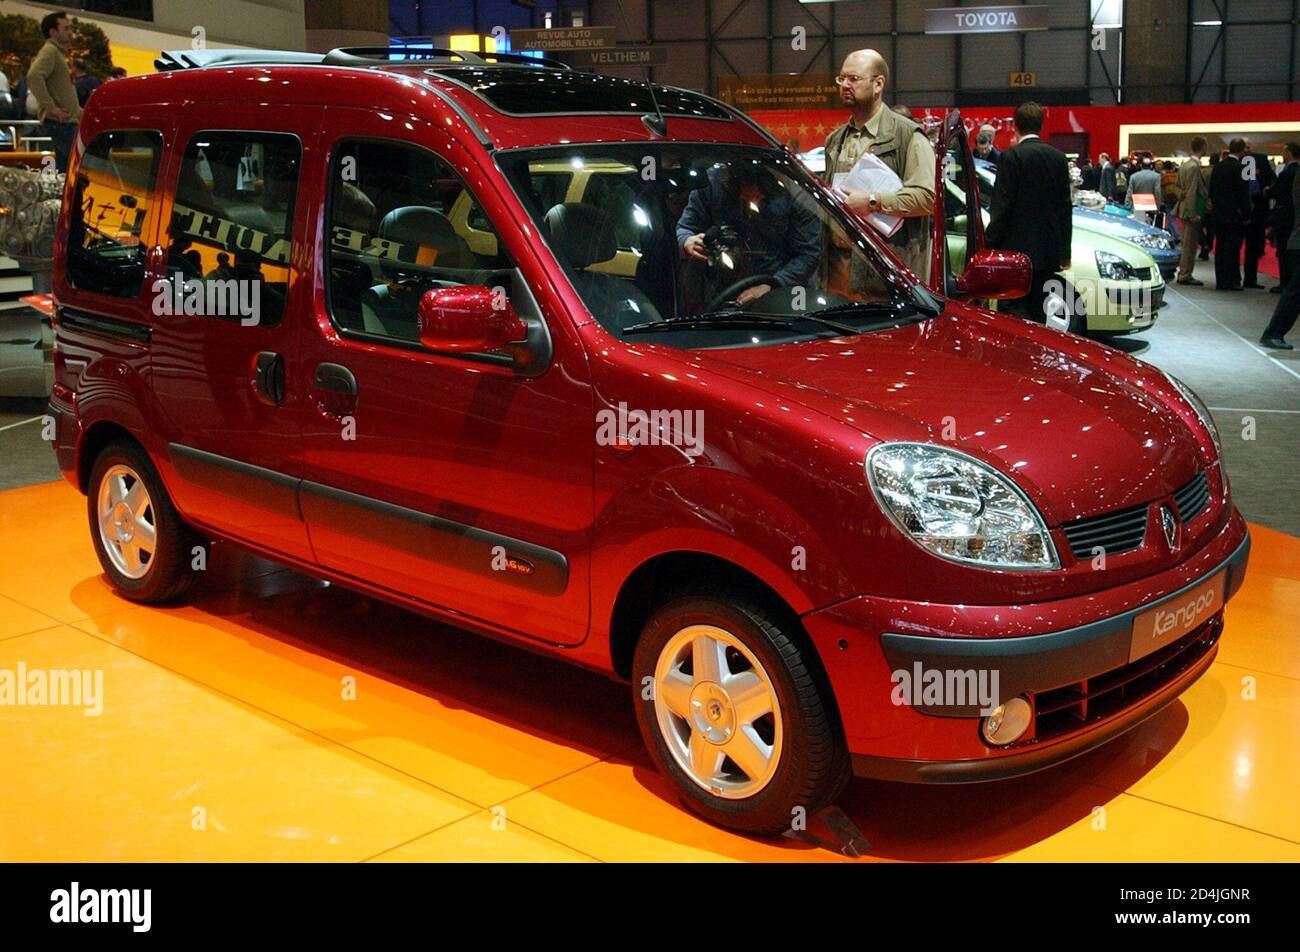 The new Renault Kangoo is seen on display as a first world presentation at  the Geneva car show in Geneva, Switzerland, March 4, 2003. The car is  powered with 1.6 liter engine